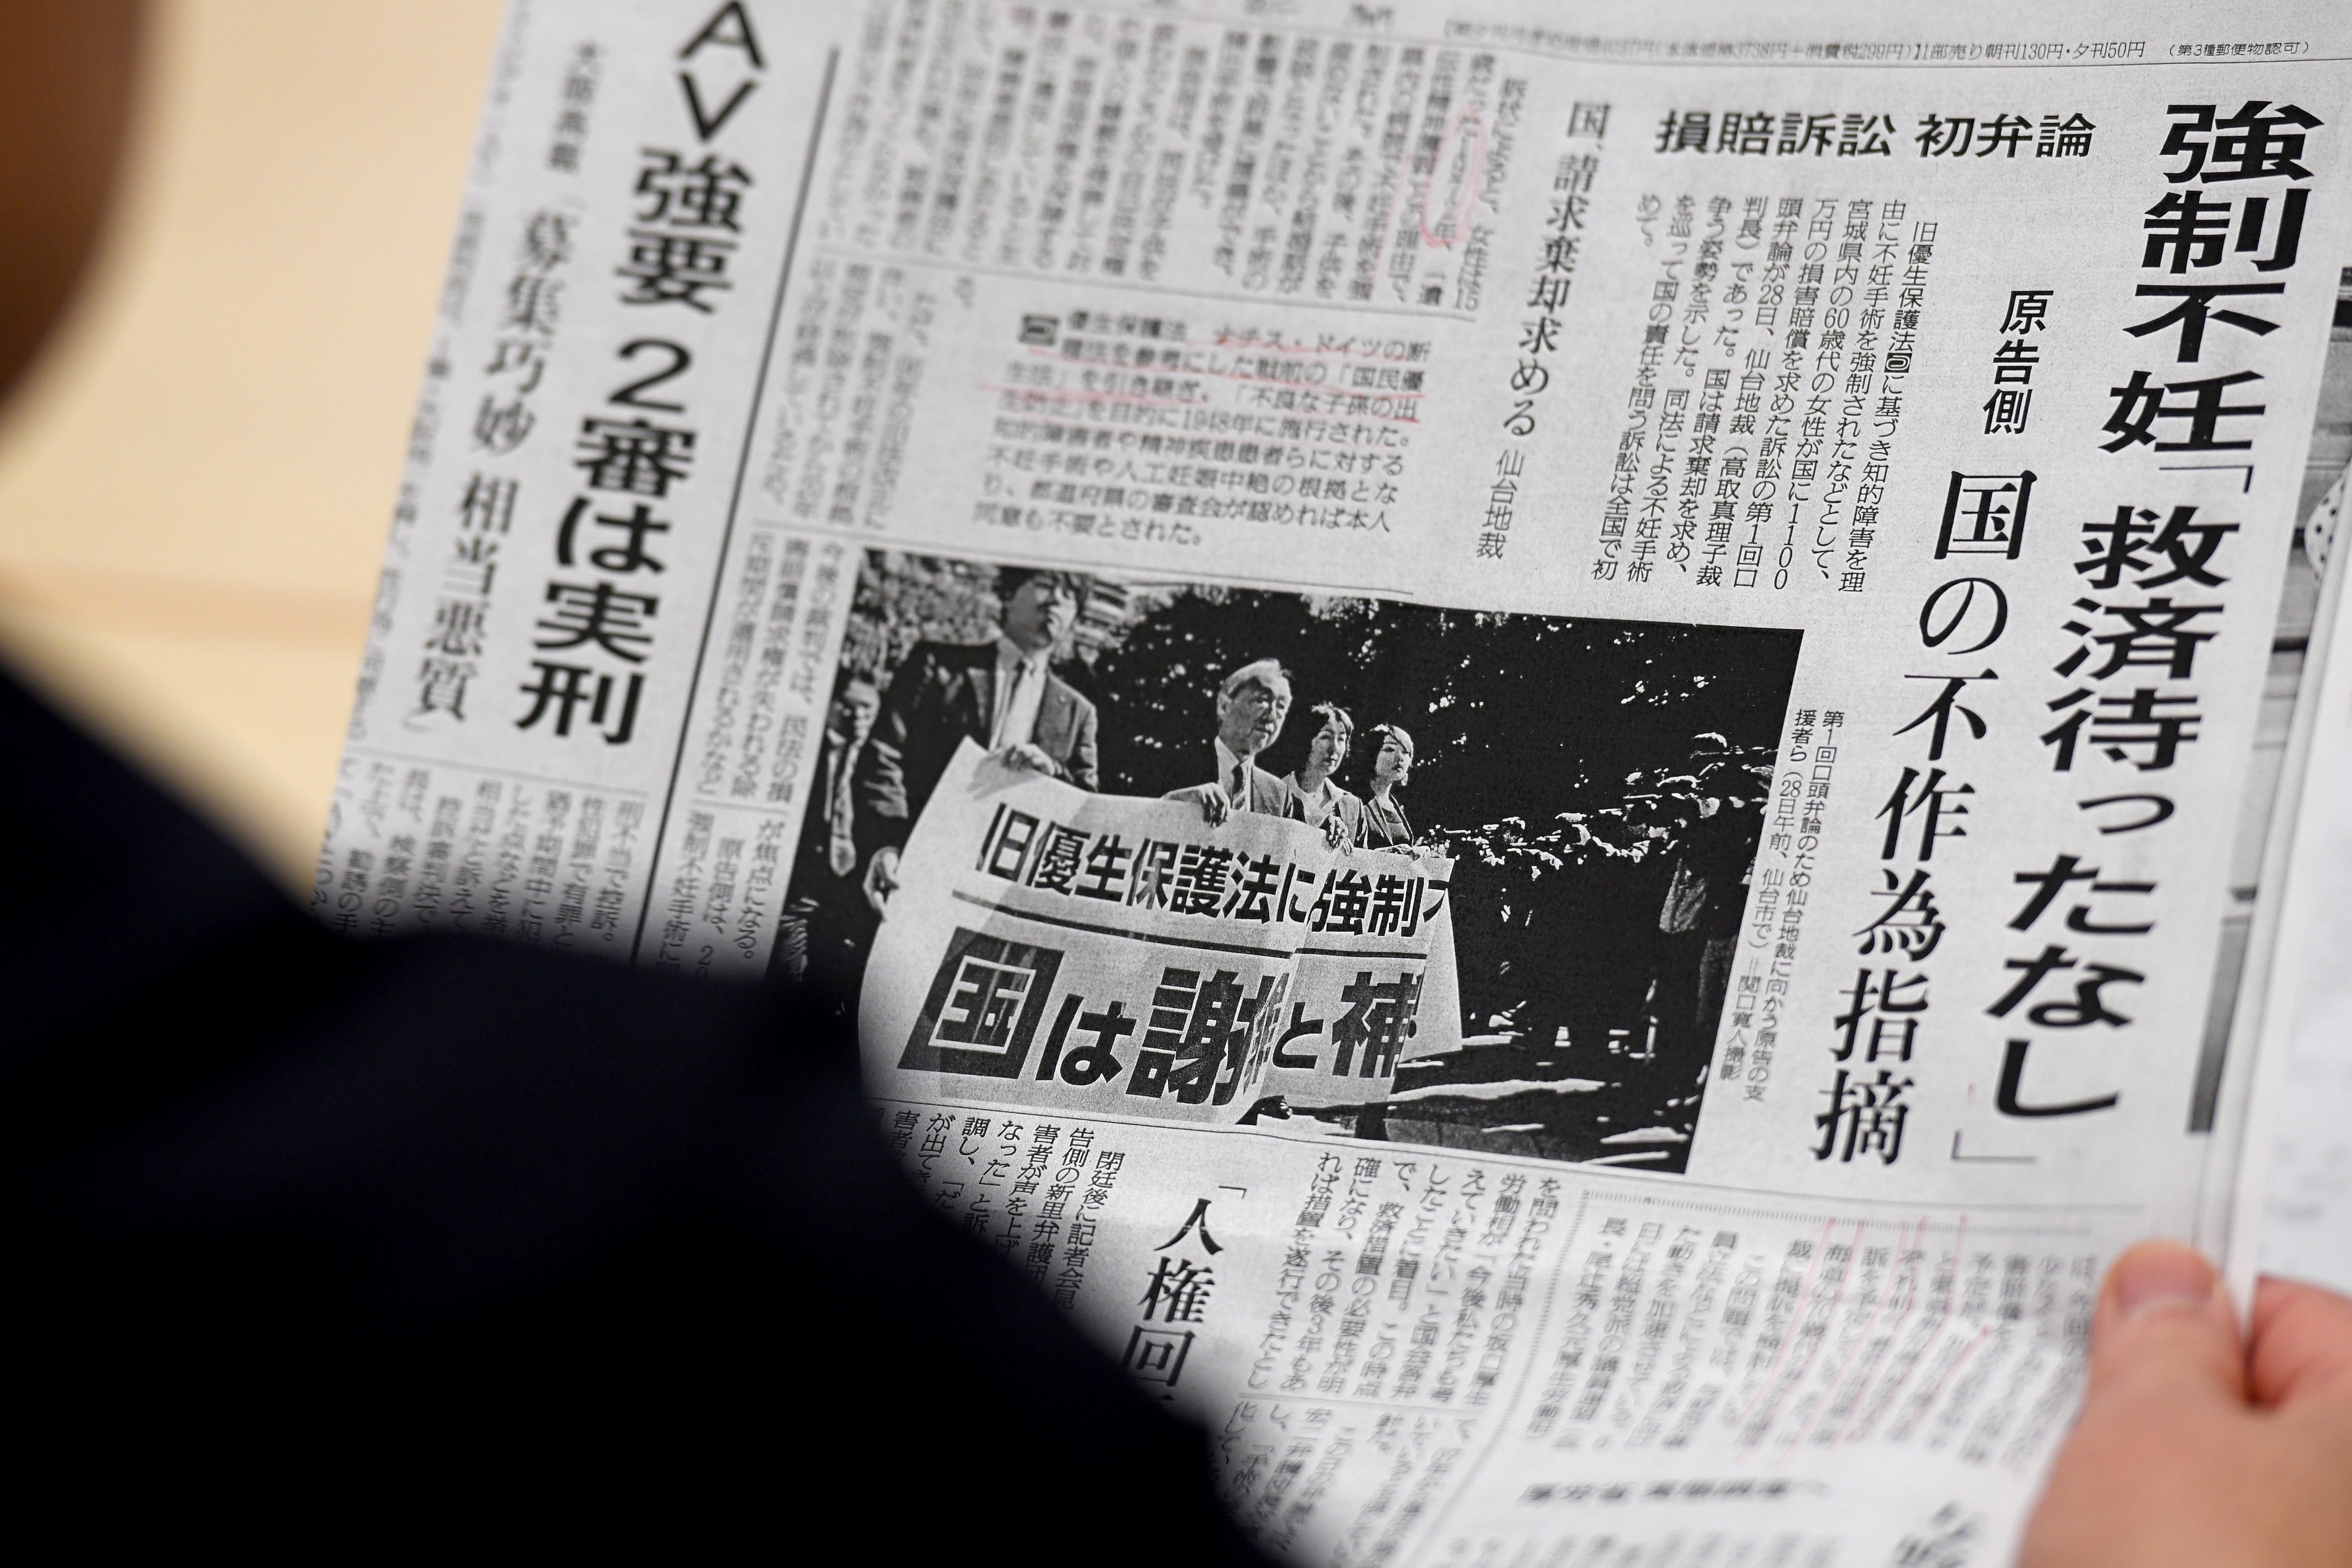 Photo from 2018 shows Michiko Sato, sister-in-law of Yumi Sato, who was sterilised as a teenager, reading a newspaper prior to a meeting with lawmakers in Tokyo